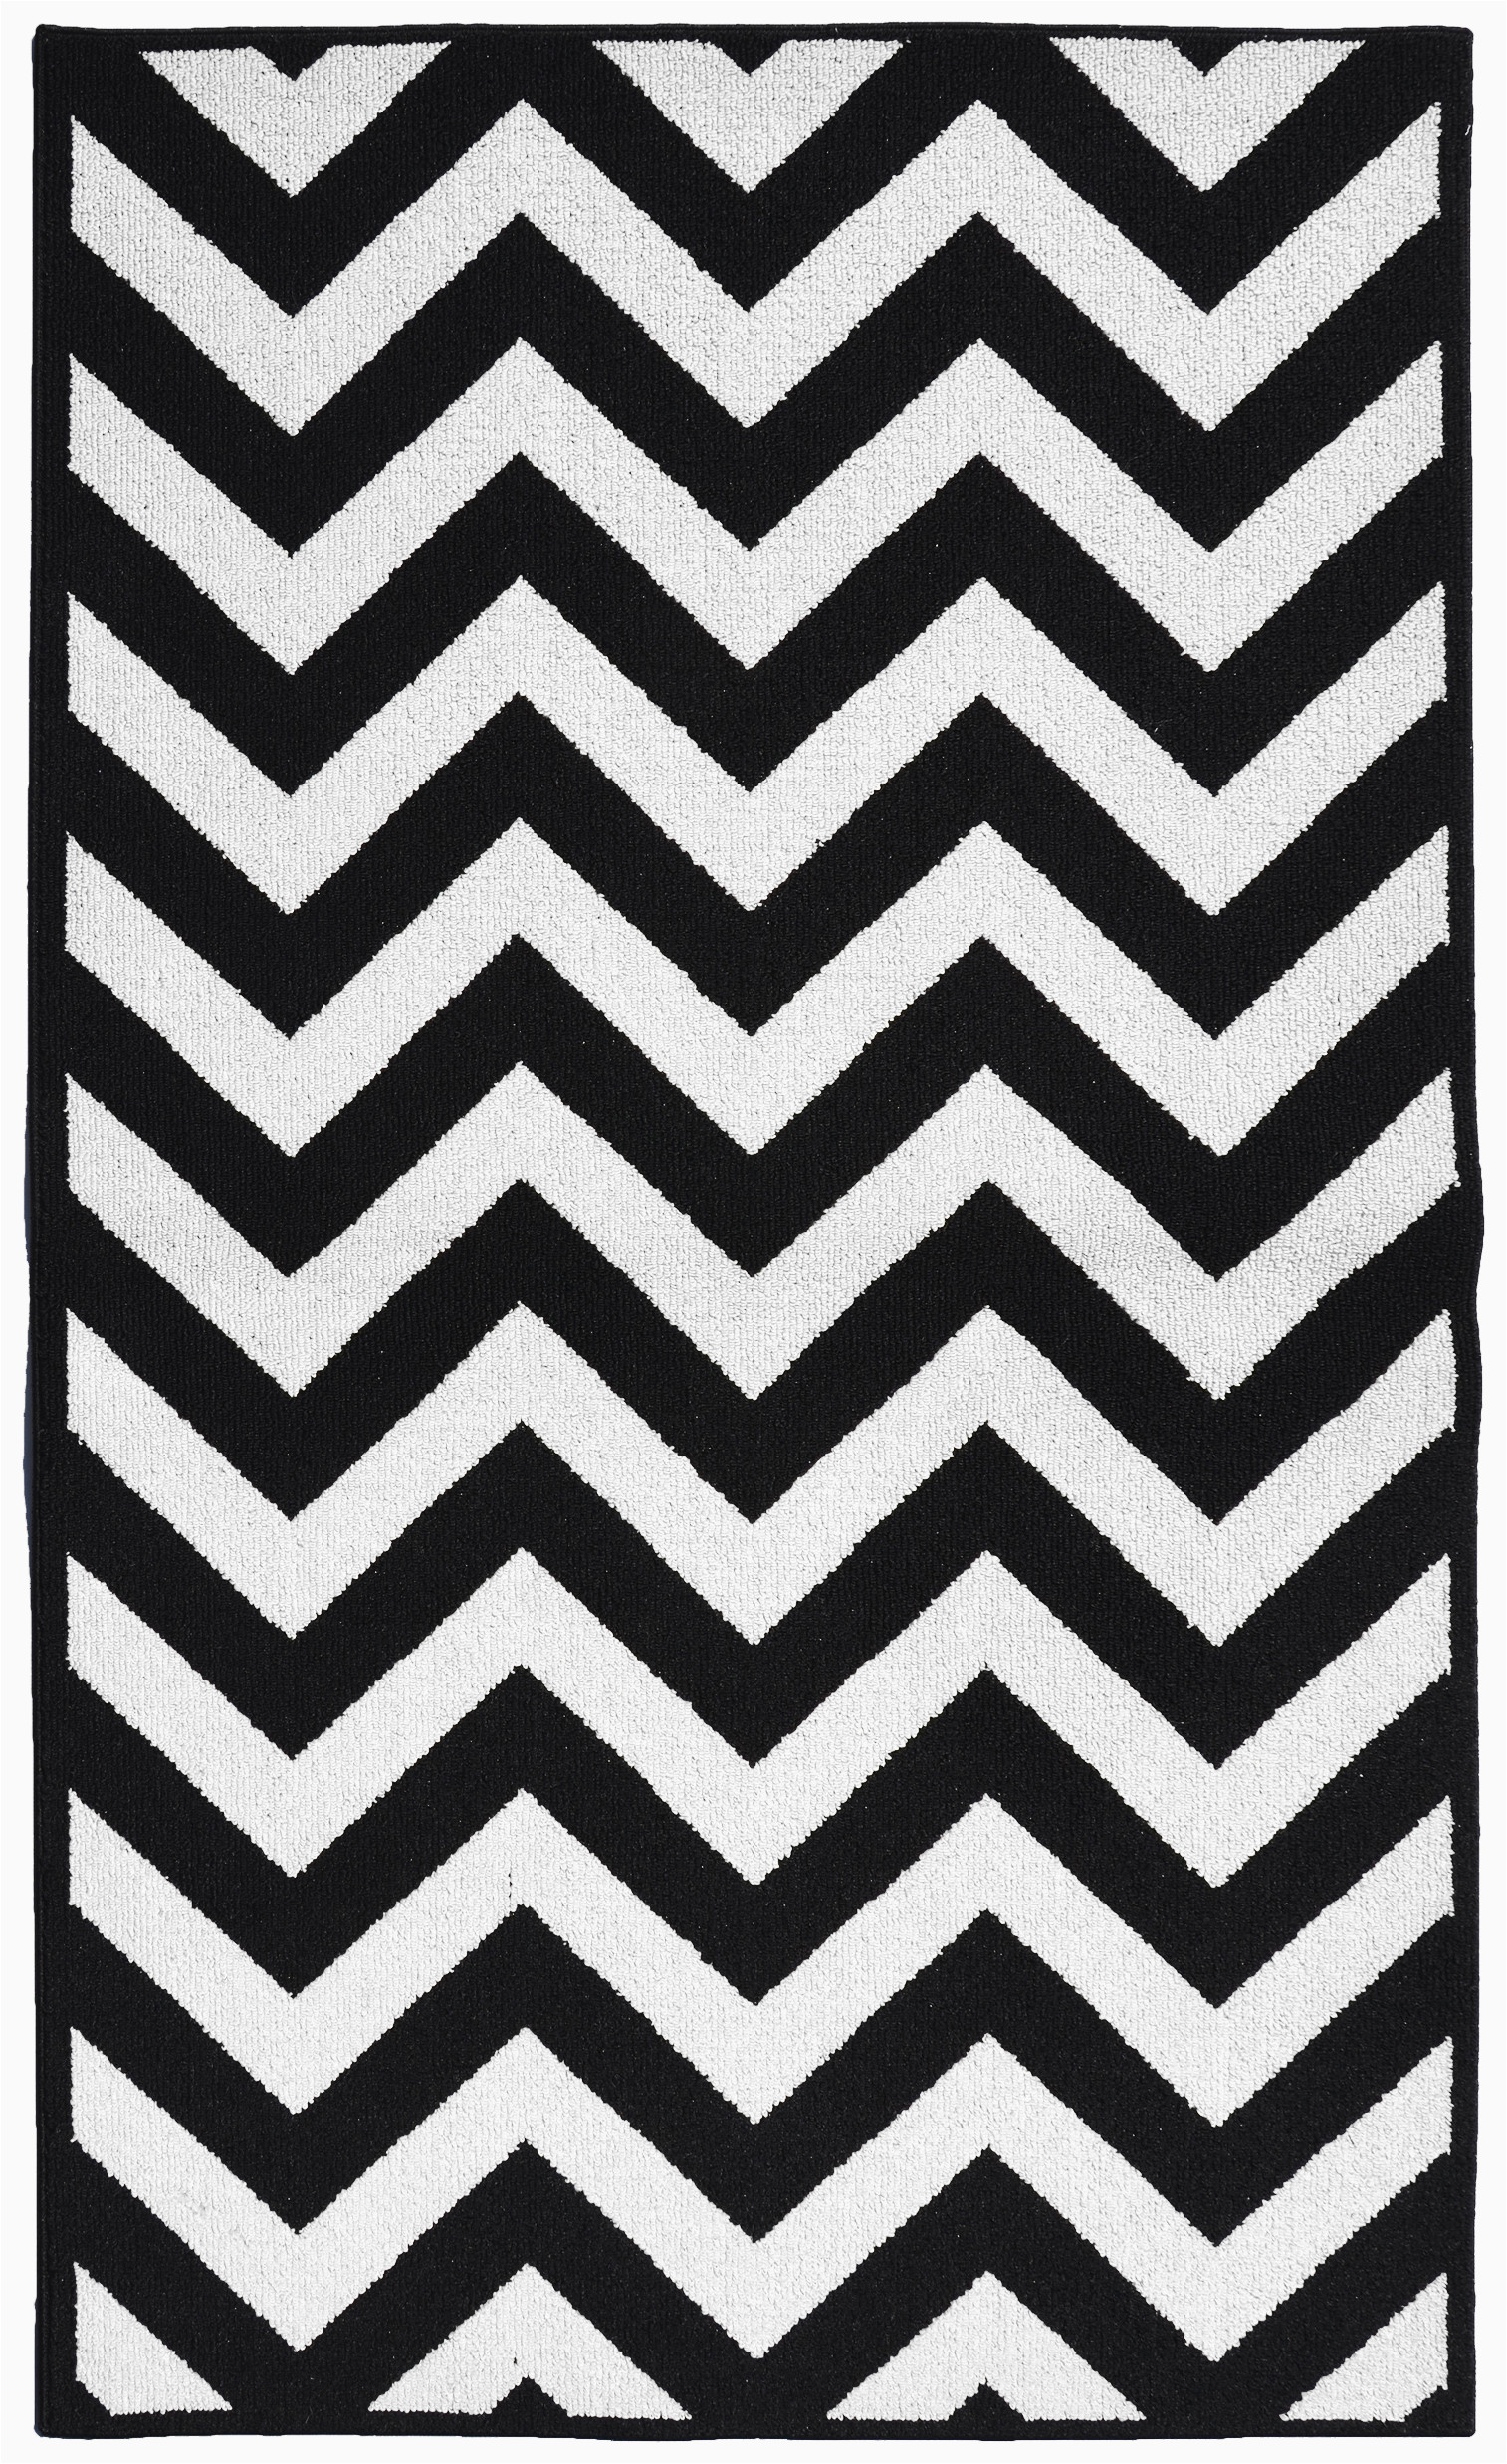 Blue and White Chevron Rug Garland Rug Large Cheveron Teal White 5×7 Indoor area Rug